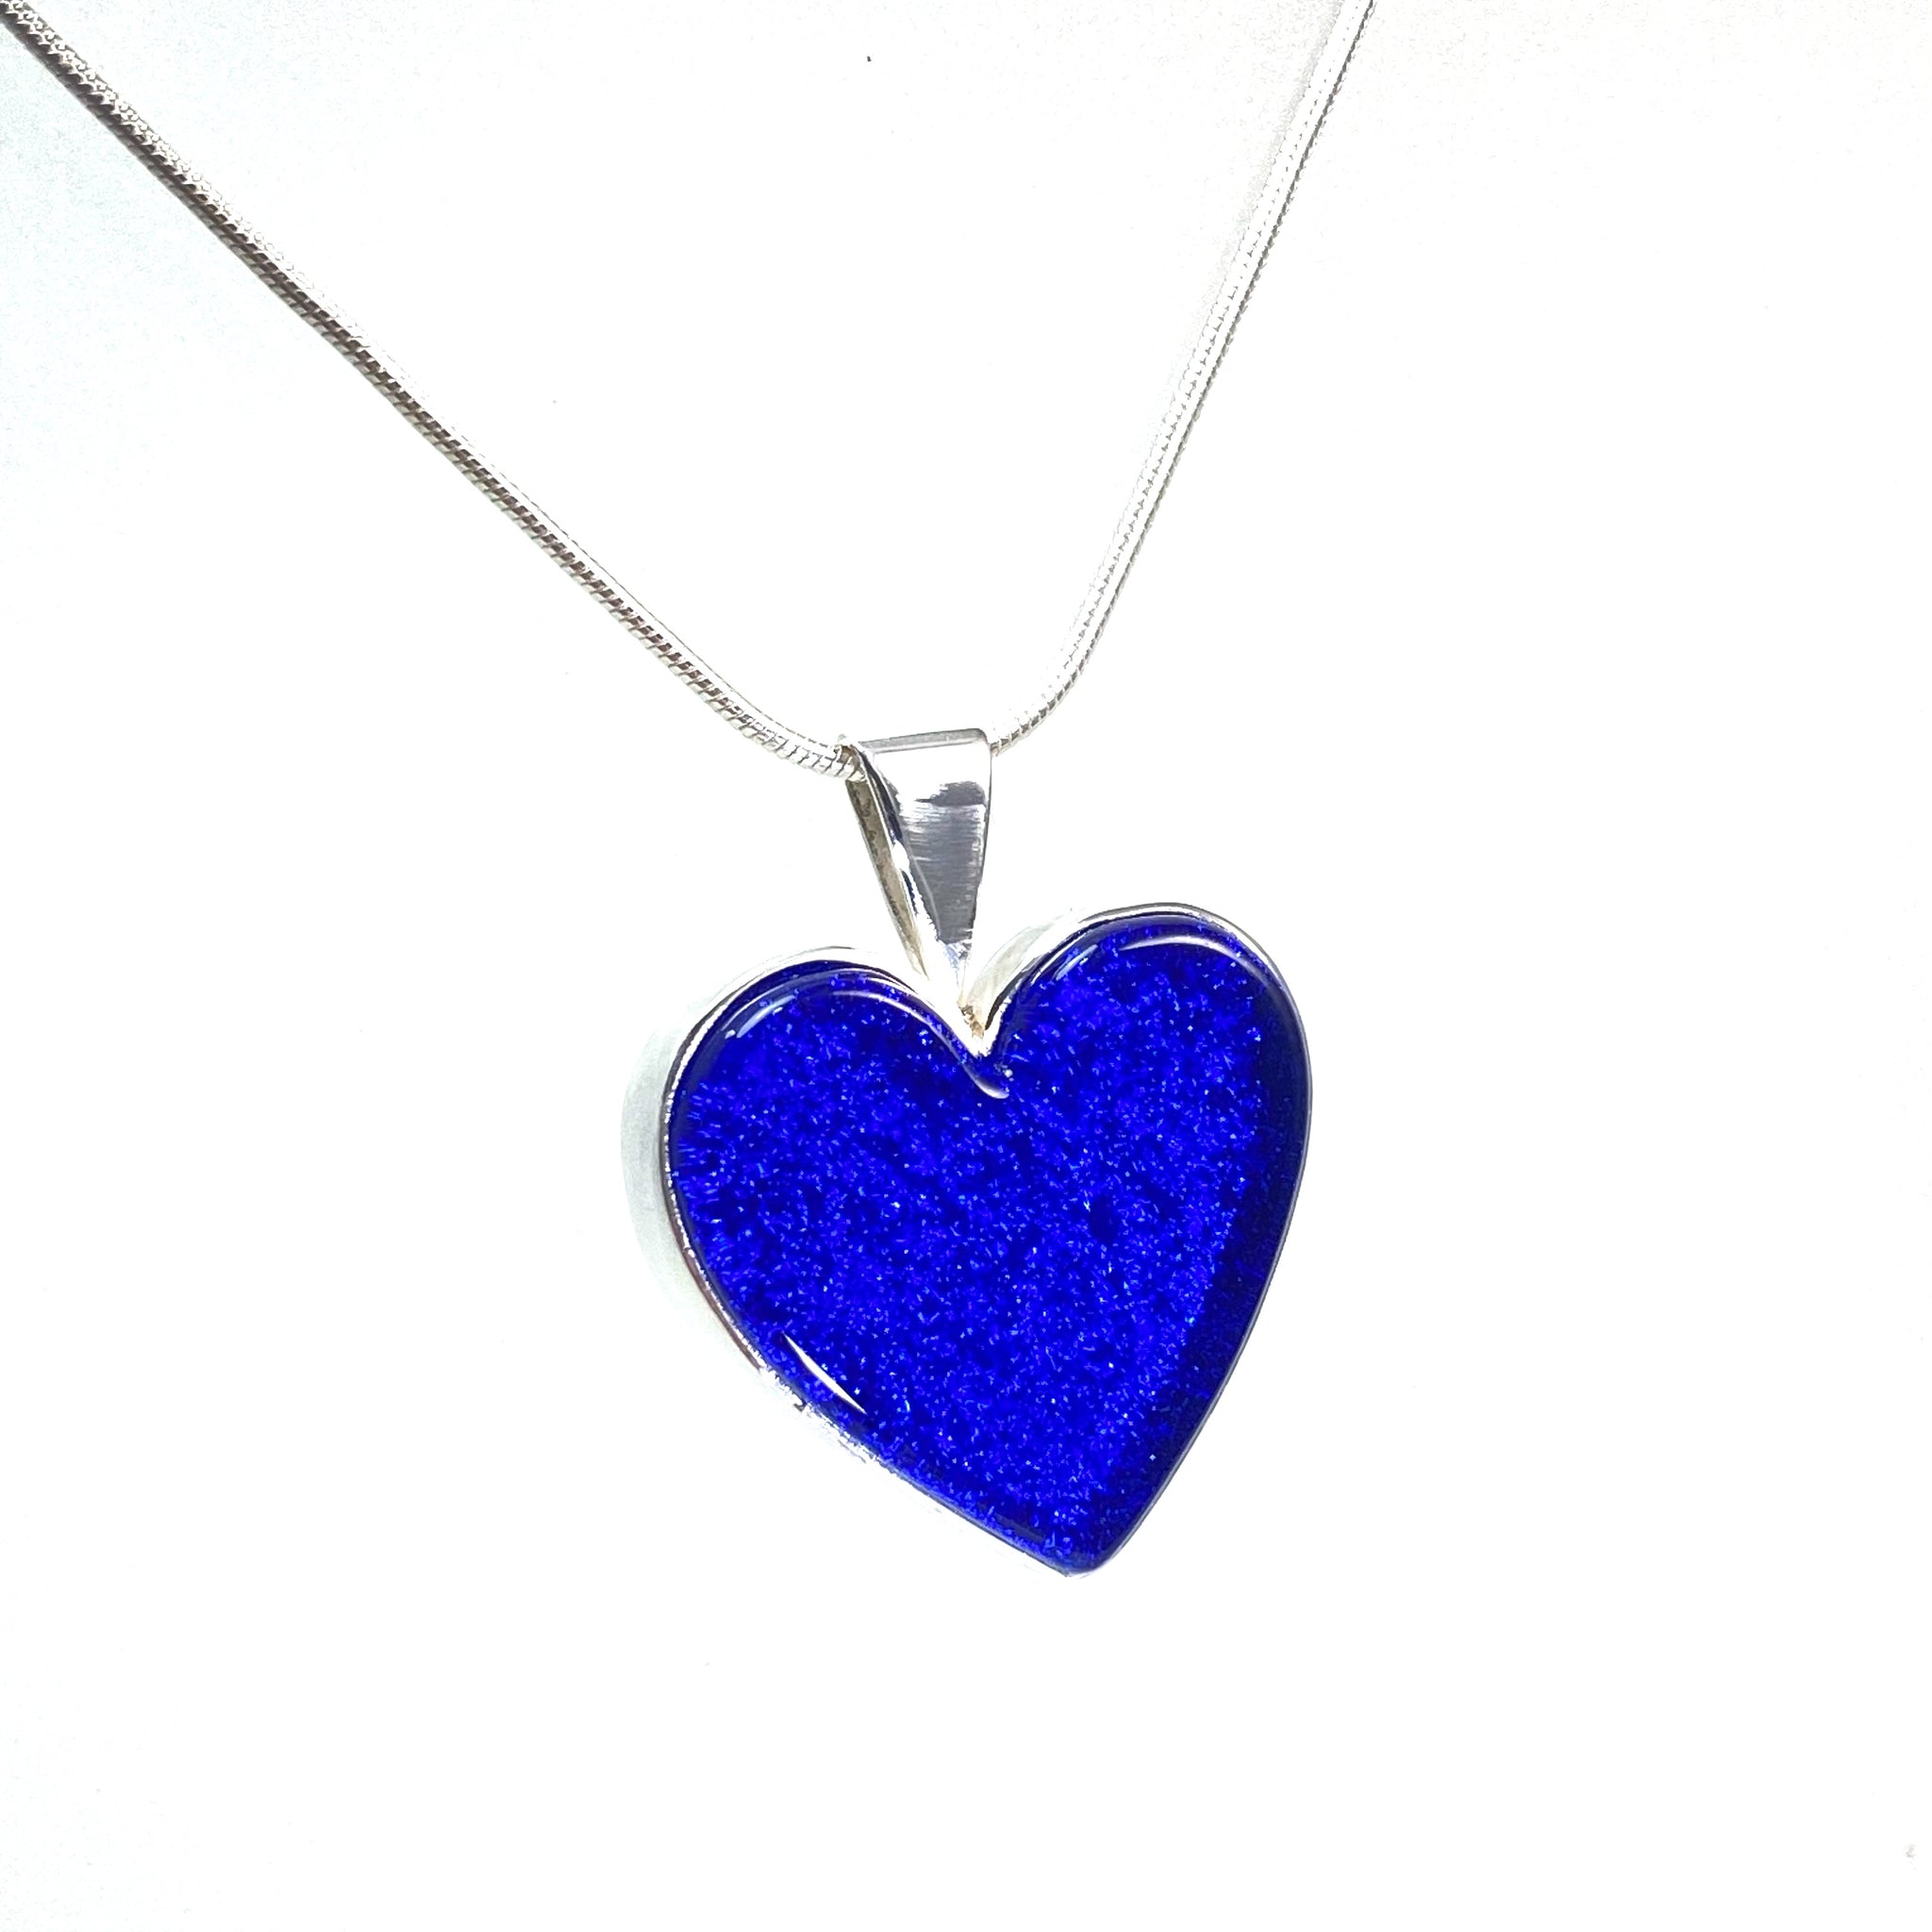 cobalt blue glass heart necklace, fused glass, glass jewelry, glass and silver jewelry, handmade, handcrafted, American Craft, hand fabricated jewelry, hand fabricated jewellery, Athen, Georgia, colorful jewelry, sparkle, bullseye glass, dichroic glass, art jewelry